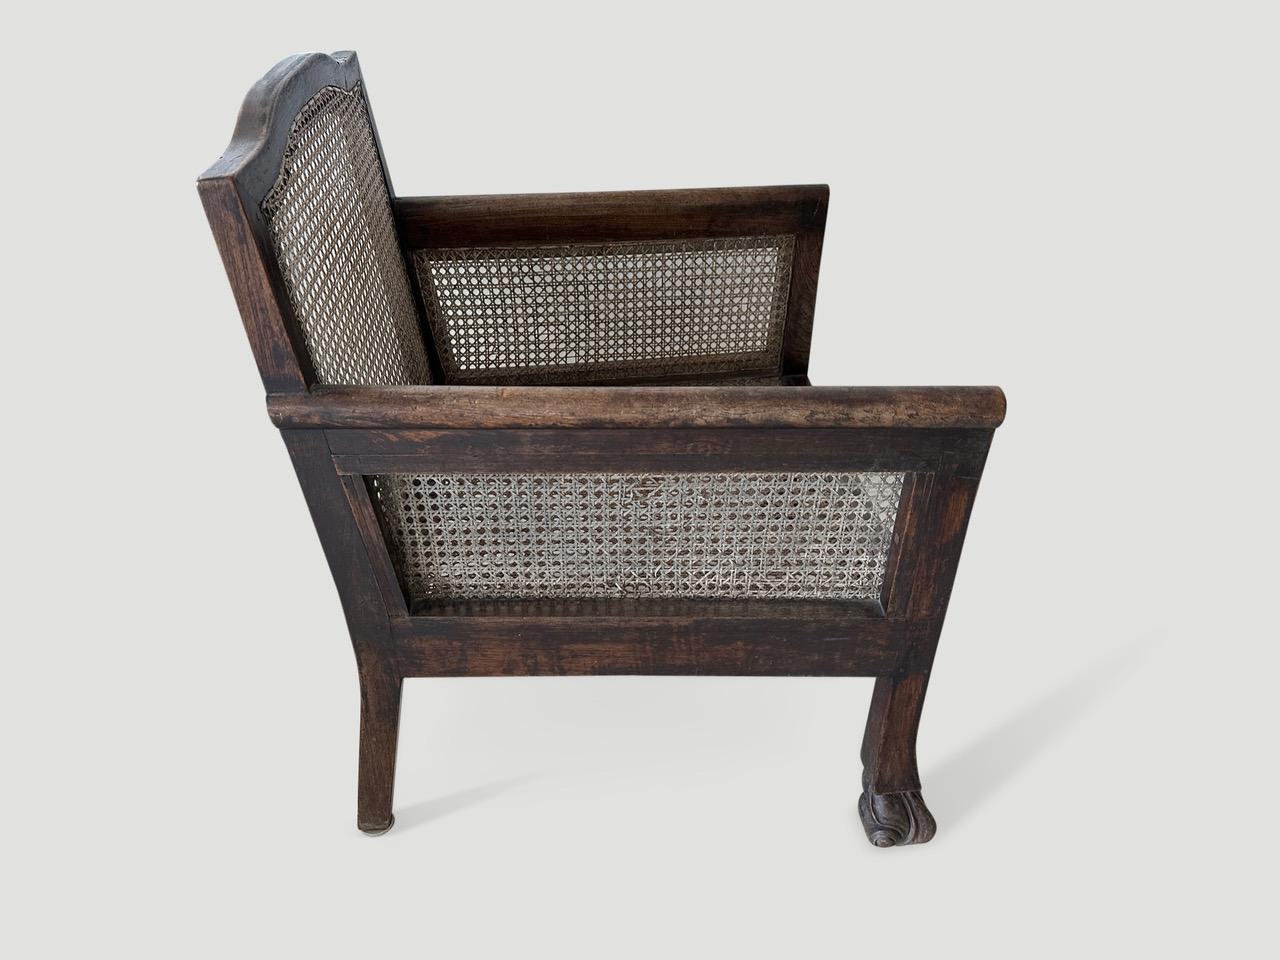 Beautiful teak framed colonial chair with lovely patina. Hand-carved feet and restored hand-woven rattan. A classic chair for any space. Includes a linen seat pillow. Full dimensions; 24